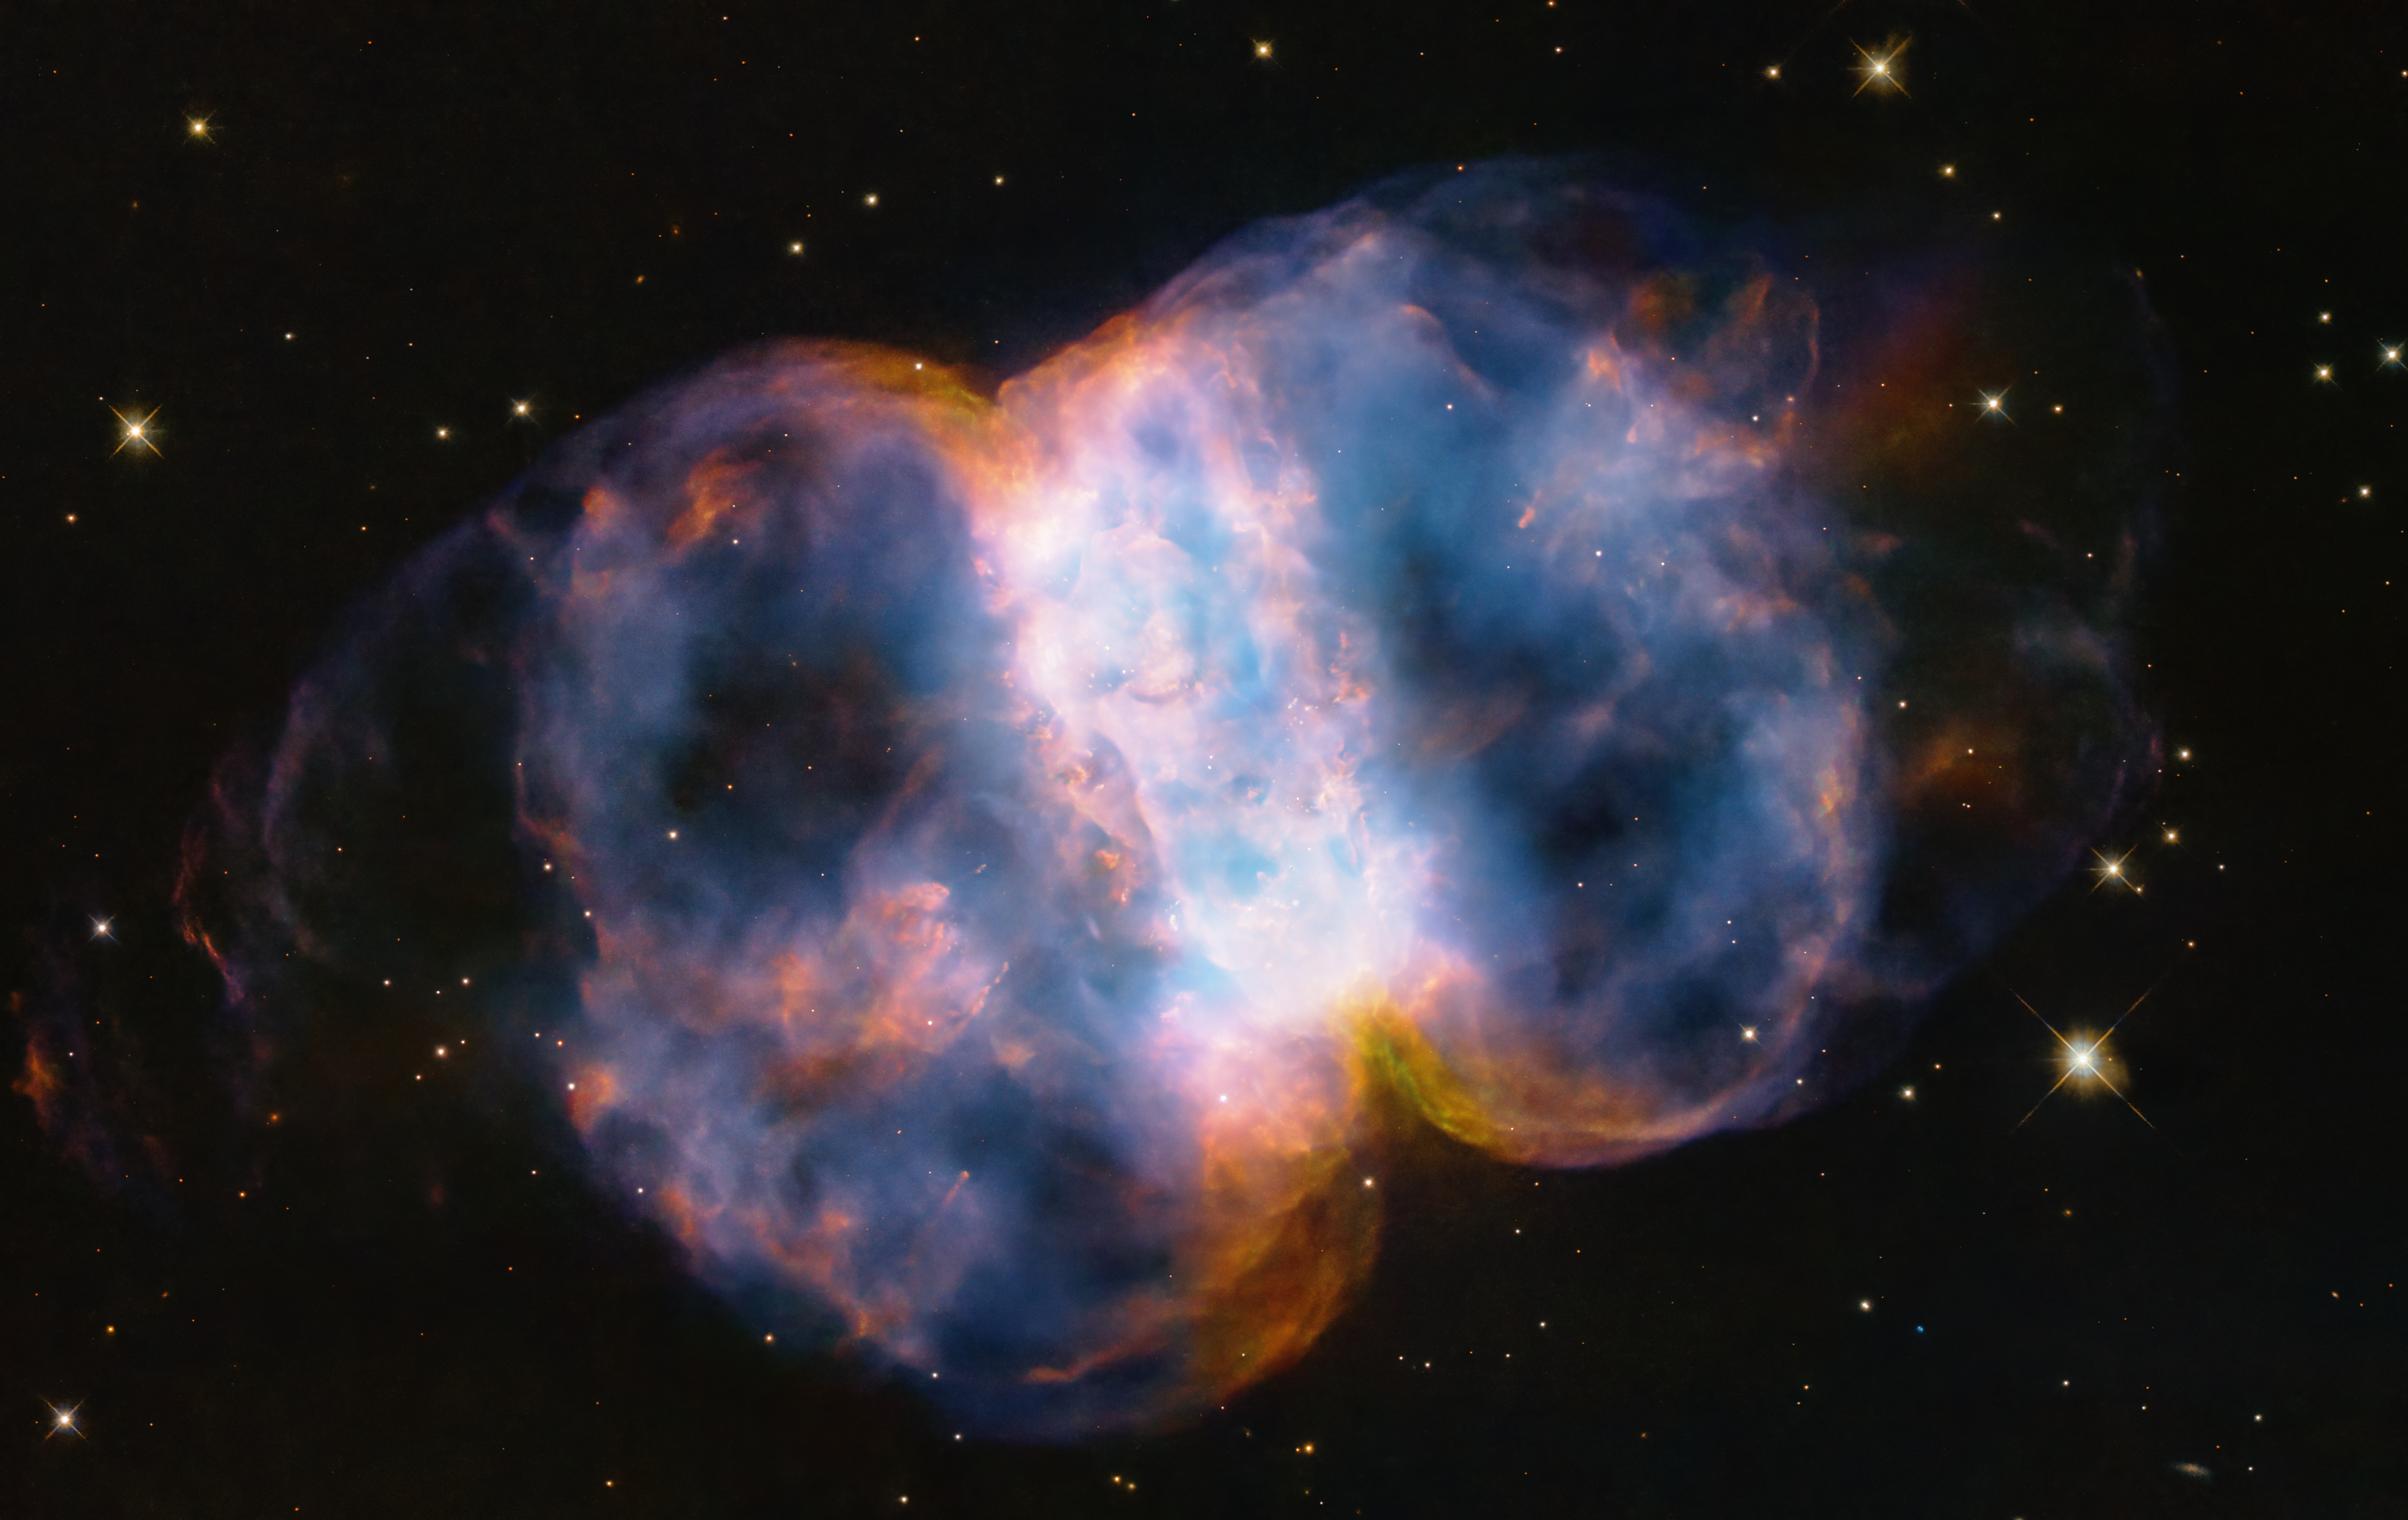 Taking up most of the image, is a multi-colored nebula in shades of blue, pink, yellow, orange, purple, and white. It appears as two translucent orbs attached by a white band.